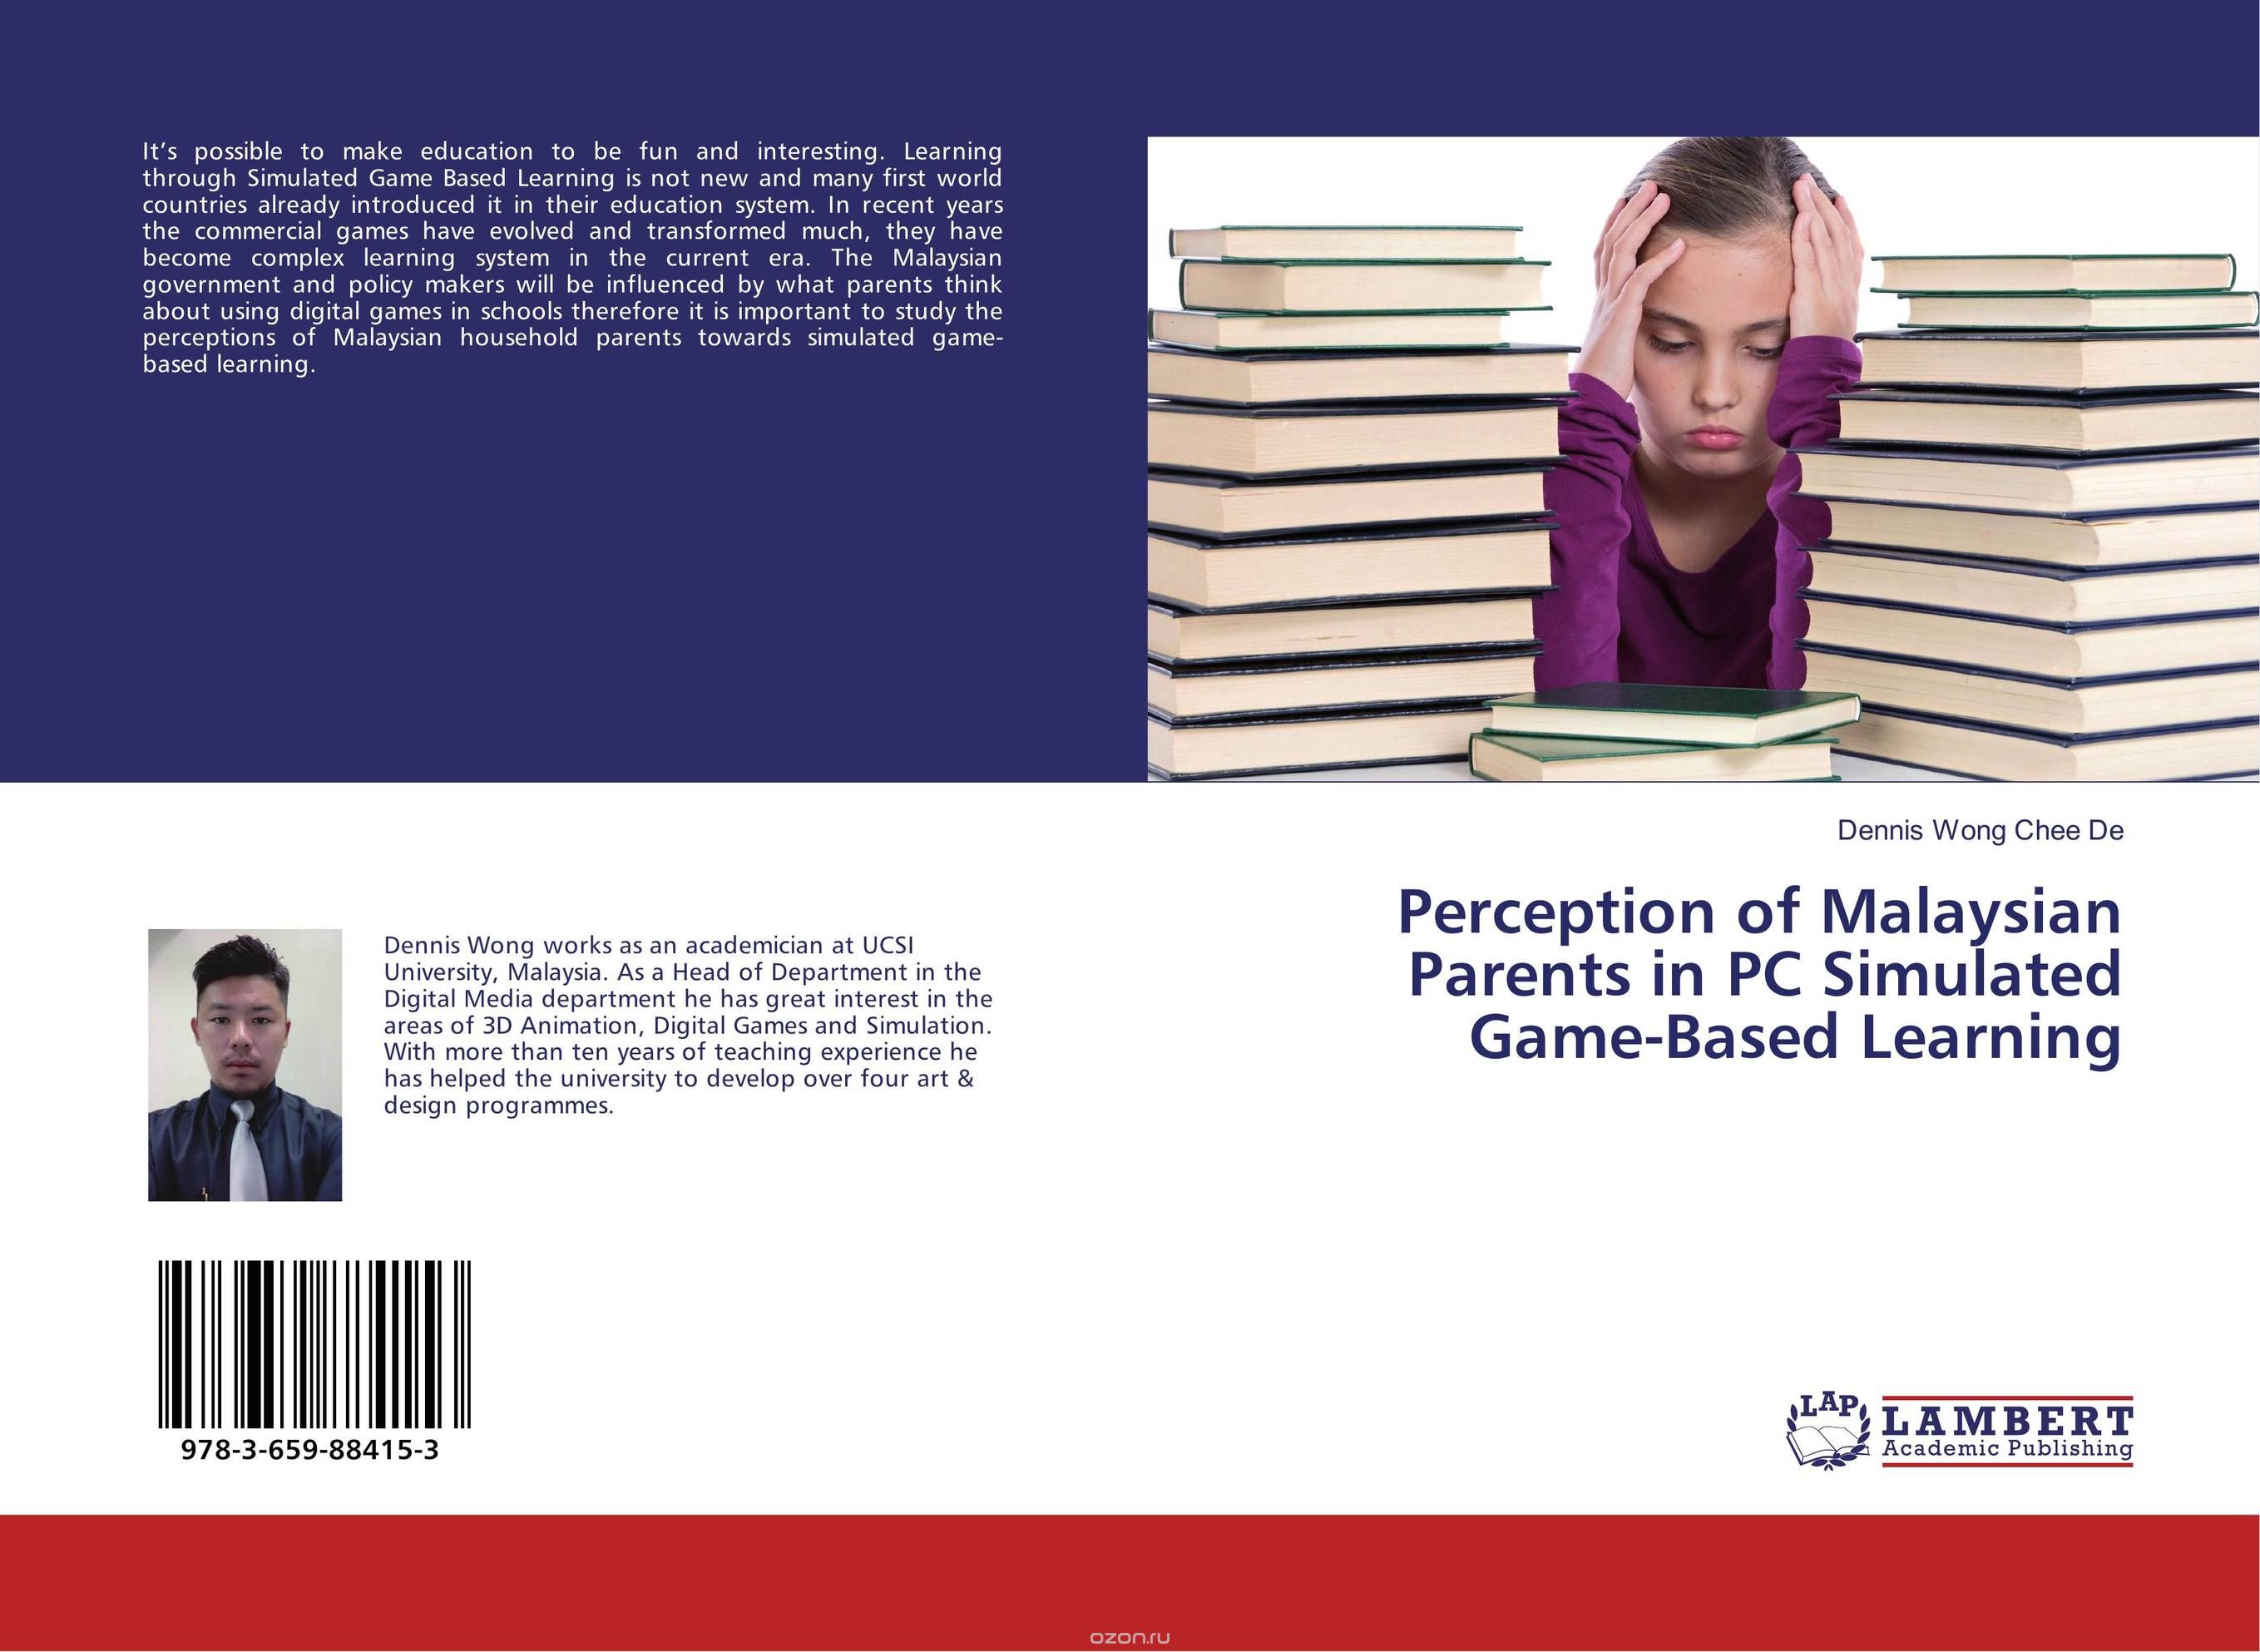 Скачать книгу "Perception of Malaysian Parents in PC Simulated Game-Based Learning"